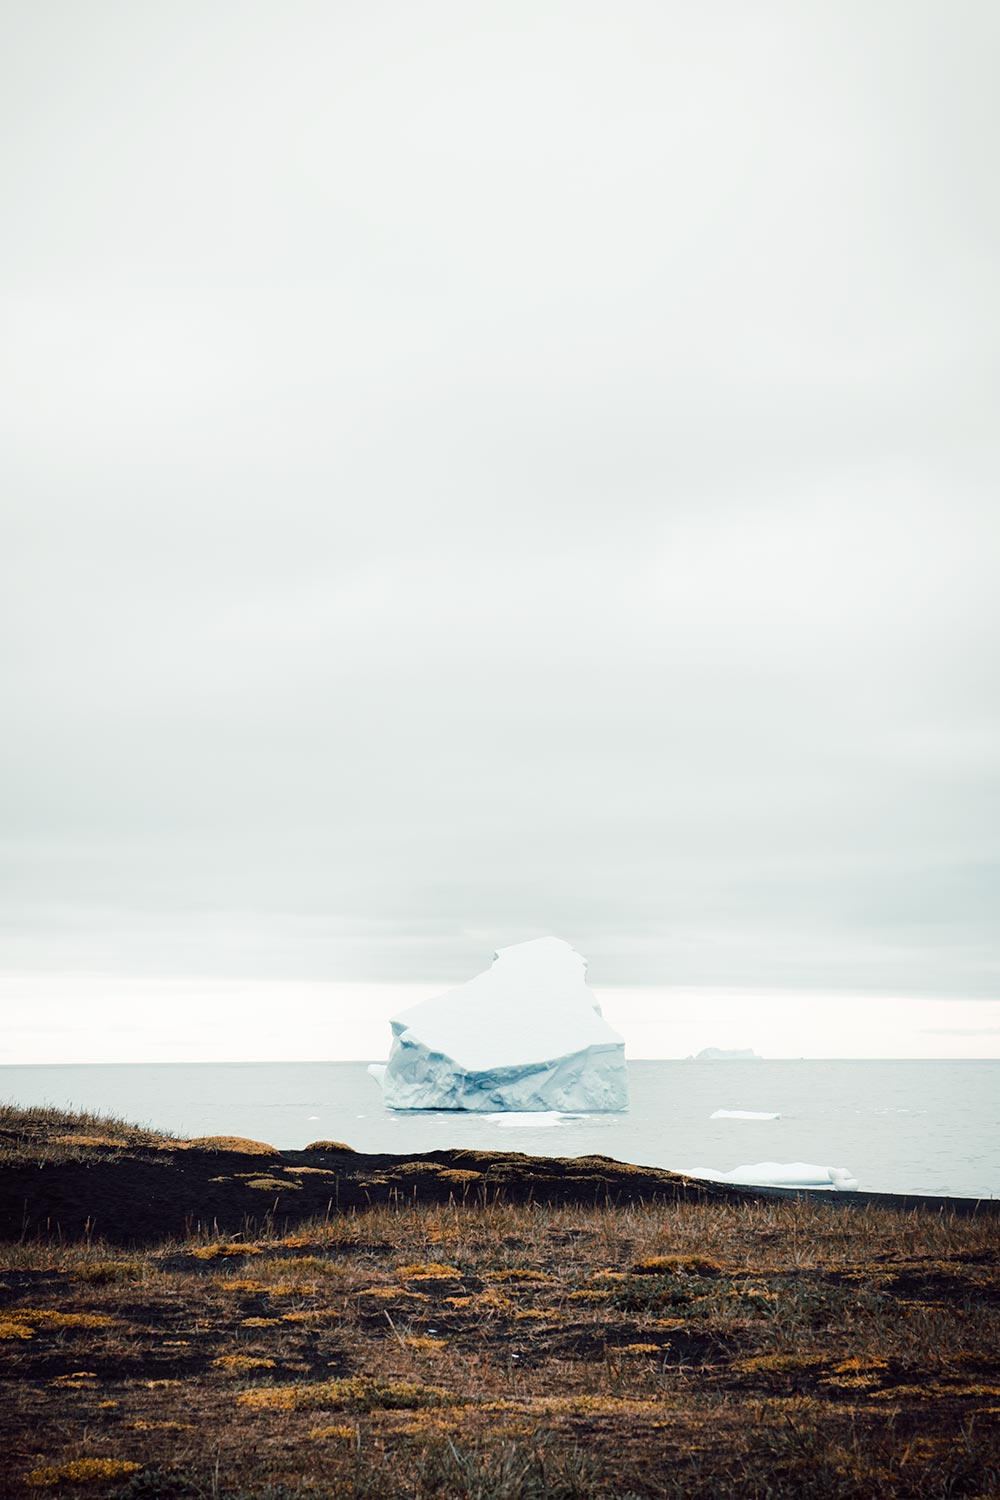 Majestic icebergs floating in Disko Bay, an iconic sight